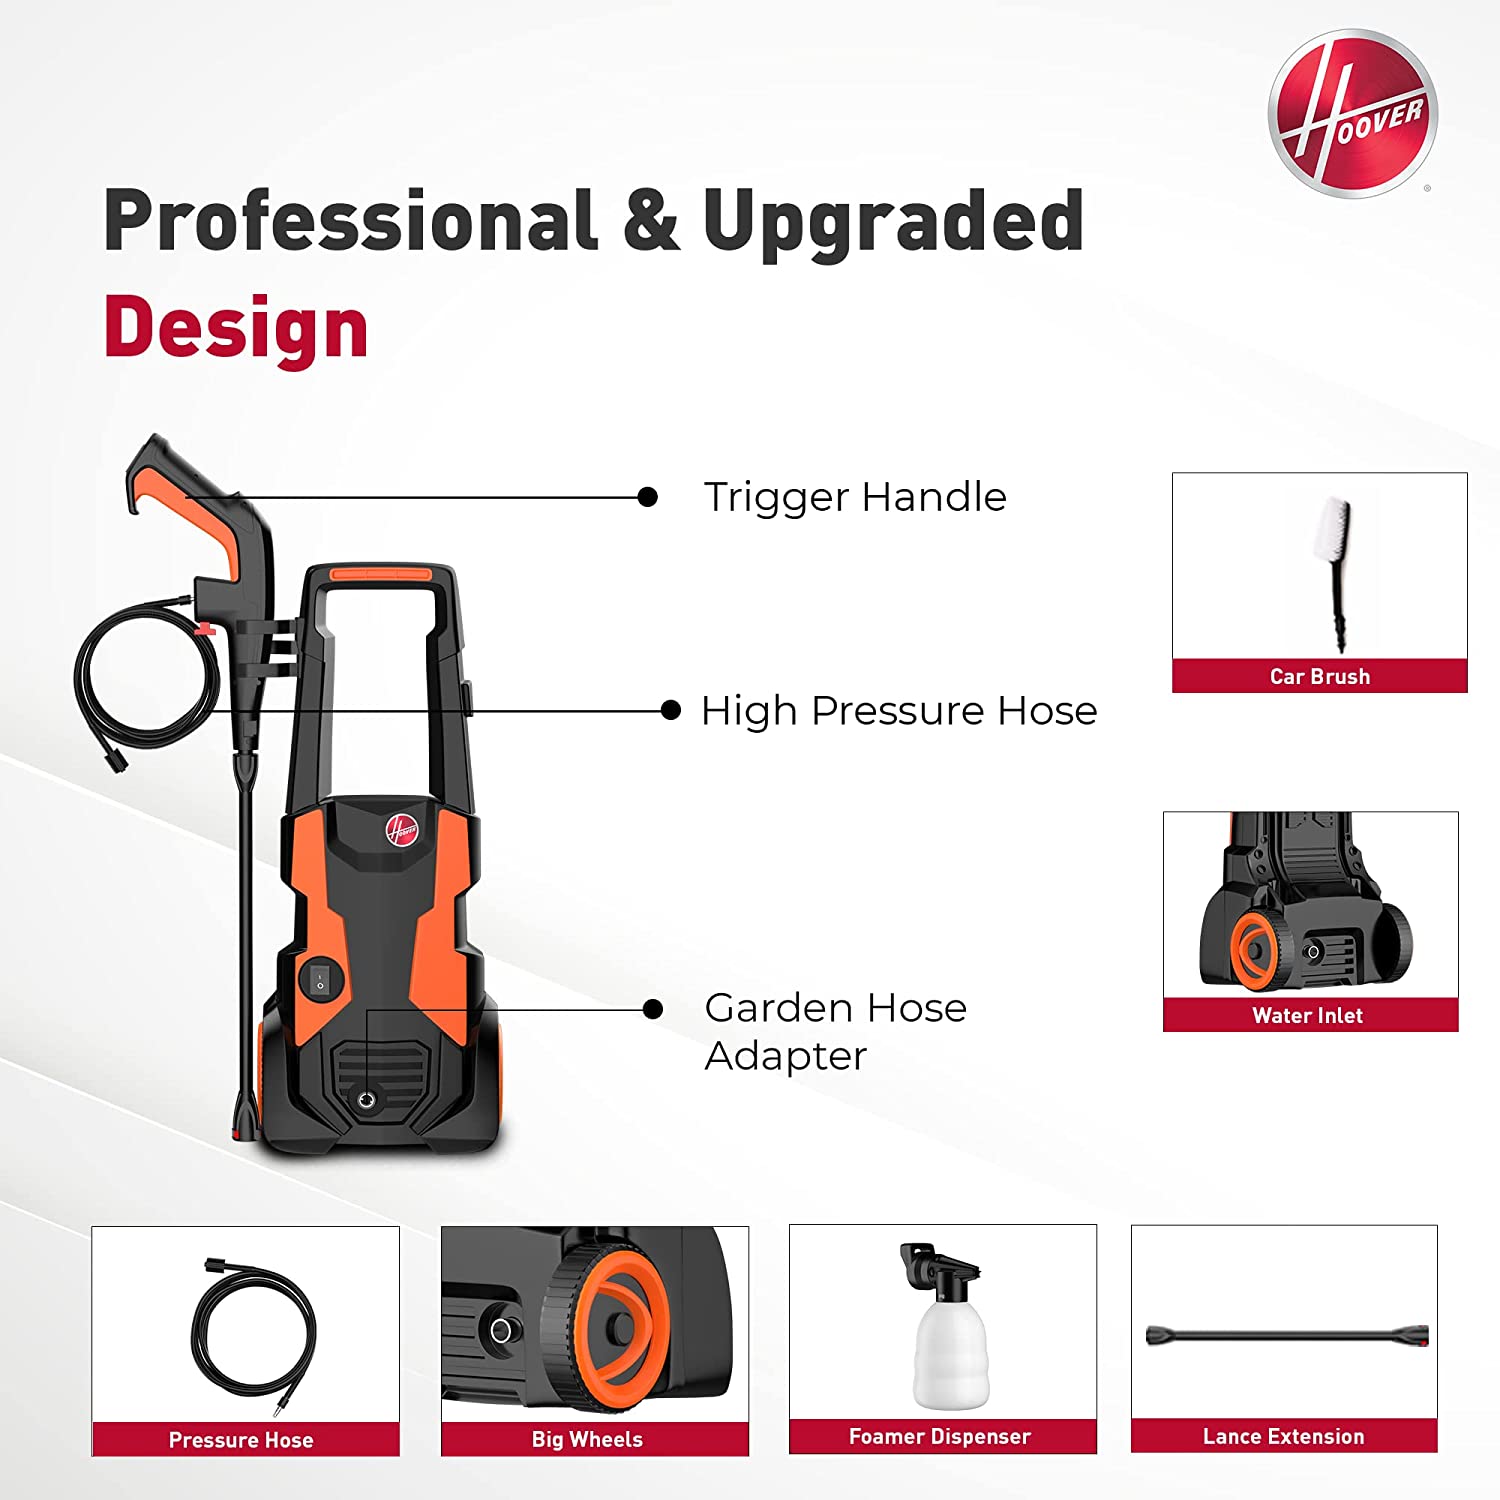 Hoover Pressure Washer 2200W 140 Bars With 7 Accessories - HPW-M2214